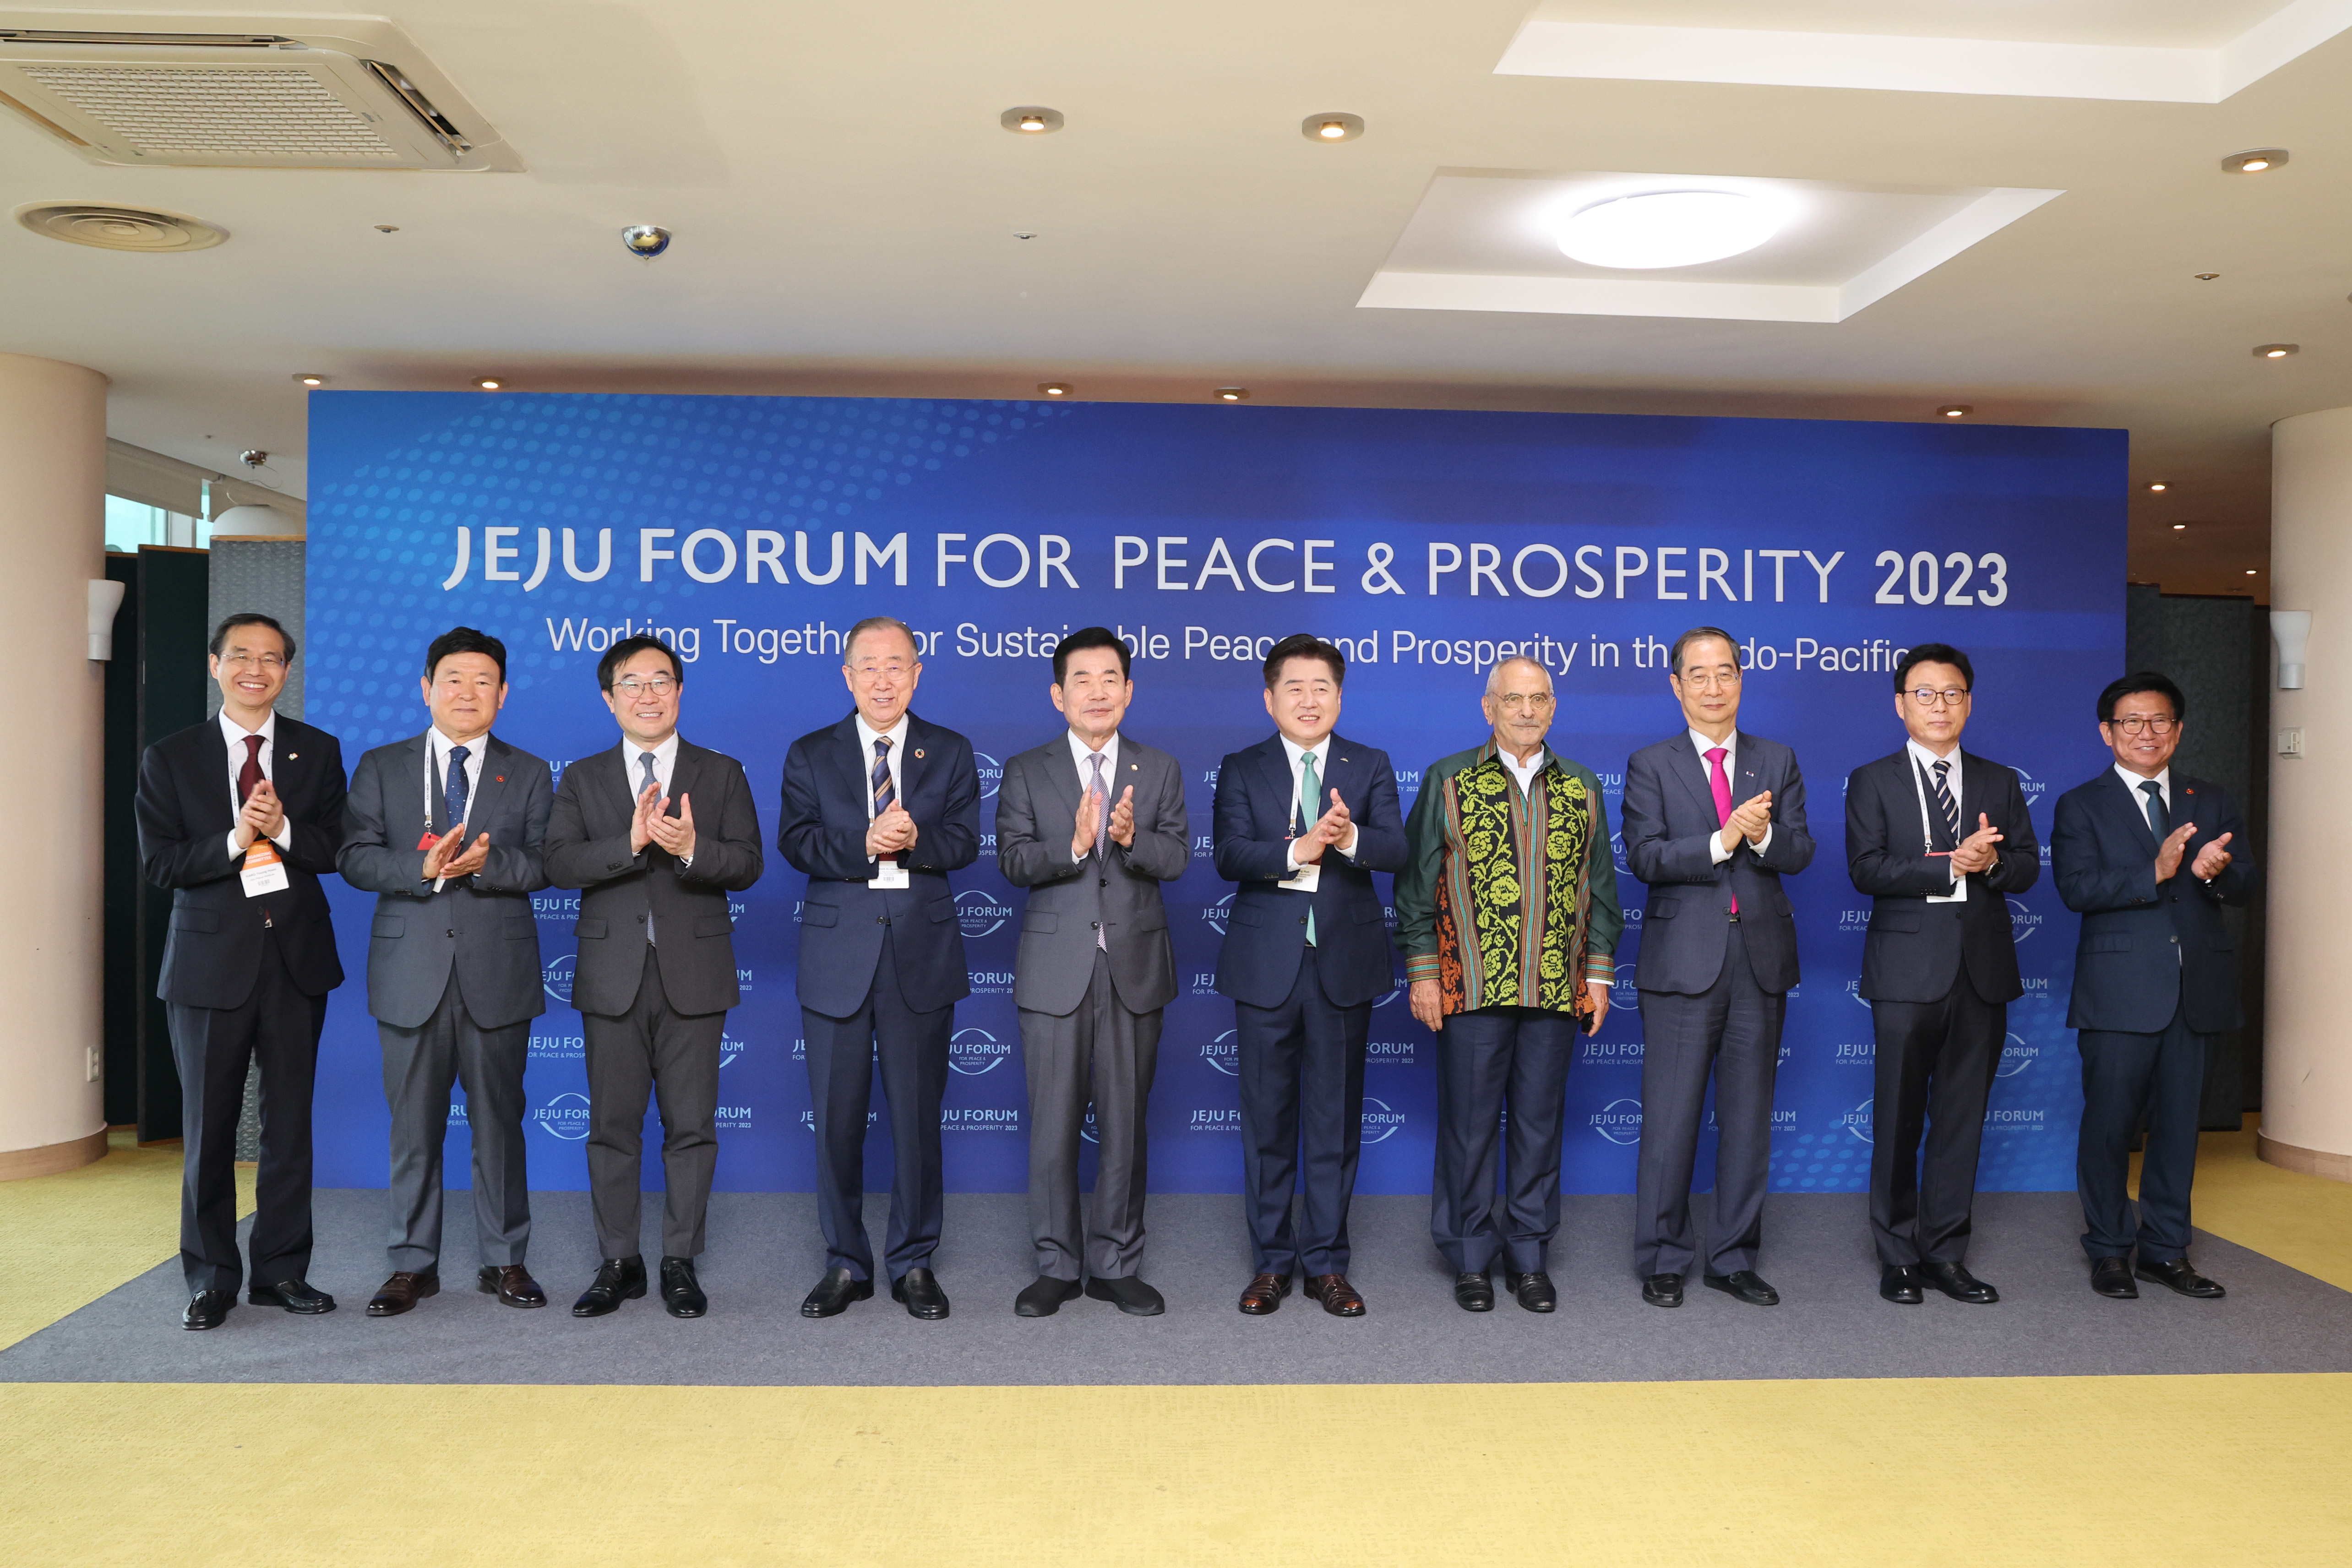 Speaker attends Jeju Forum 2023, presides over luncheon (1) 관련사진 1 보기